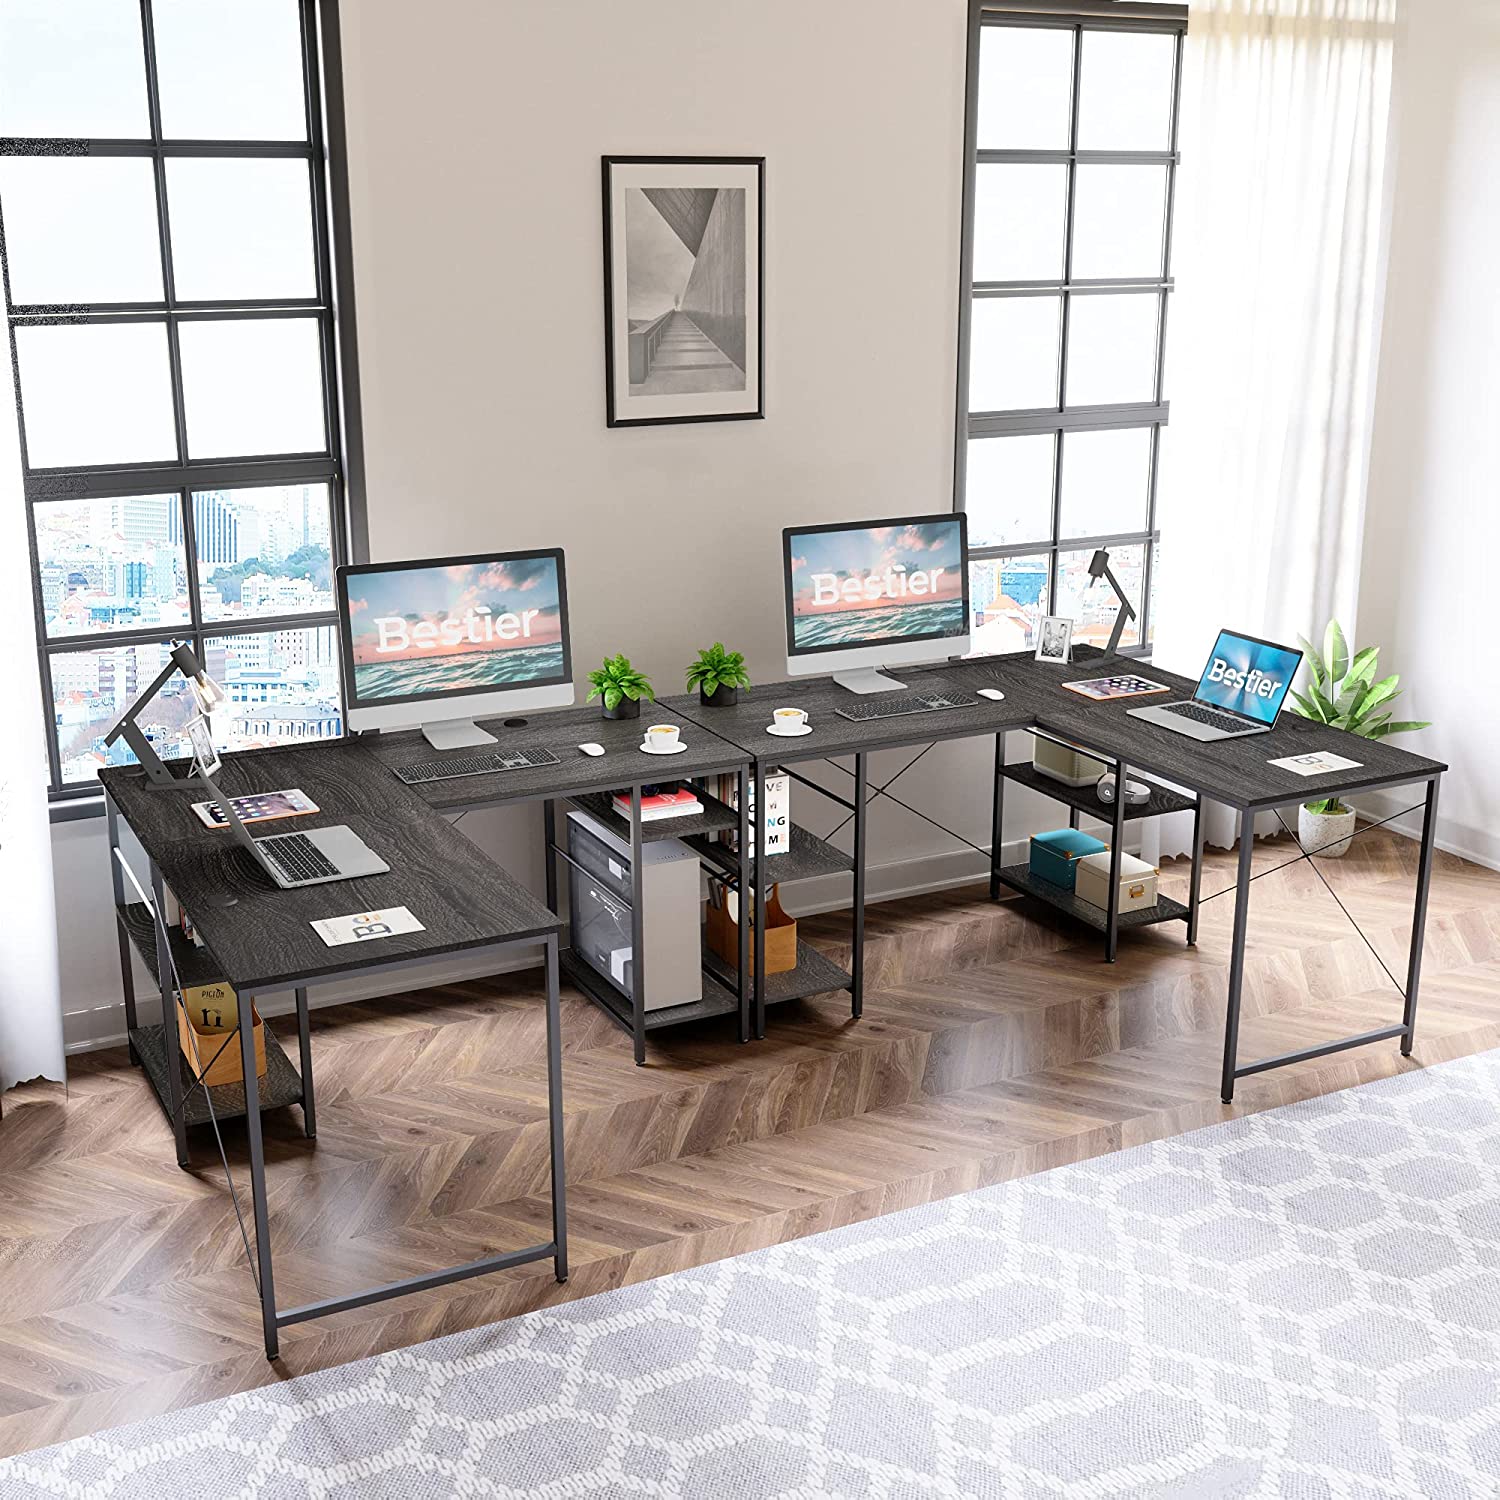 Bestier 86.6 inch Home Office Desk Reversible L Shaped Computer Table with Storage Shelves in Charcoal - image 5 of 9